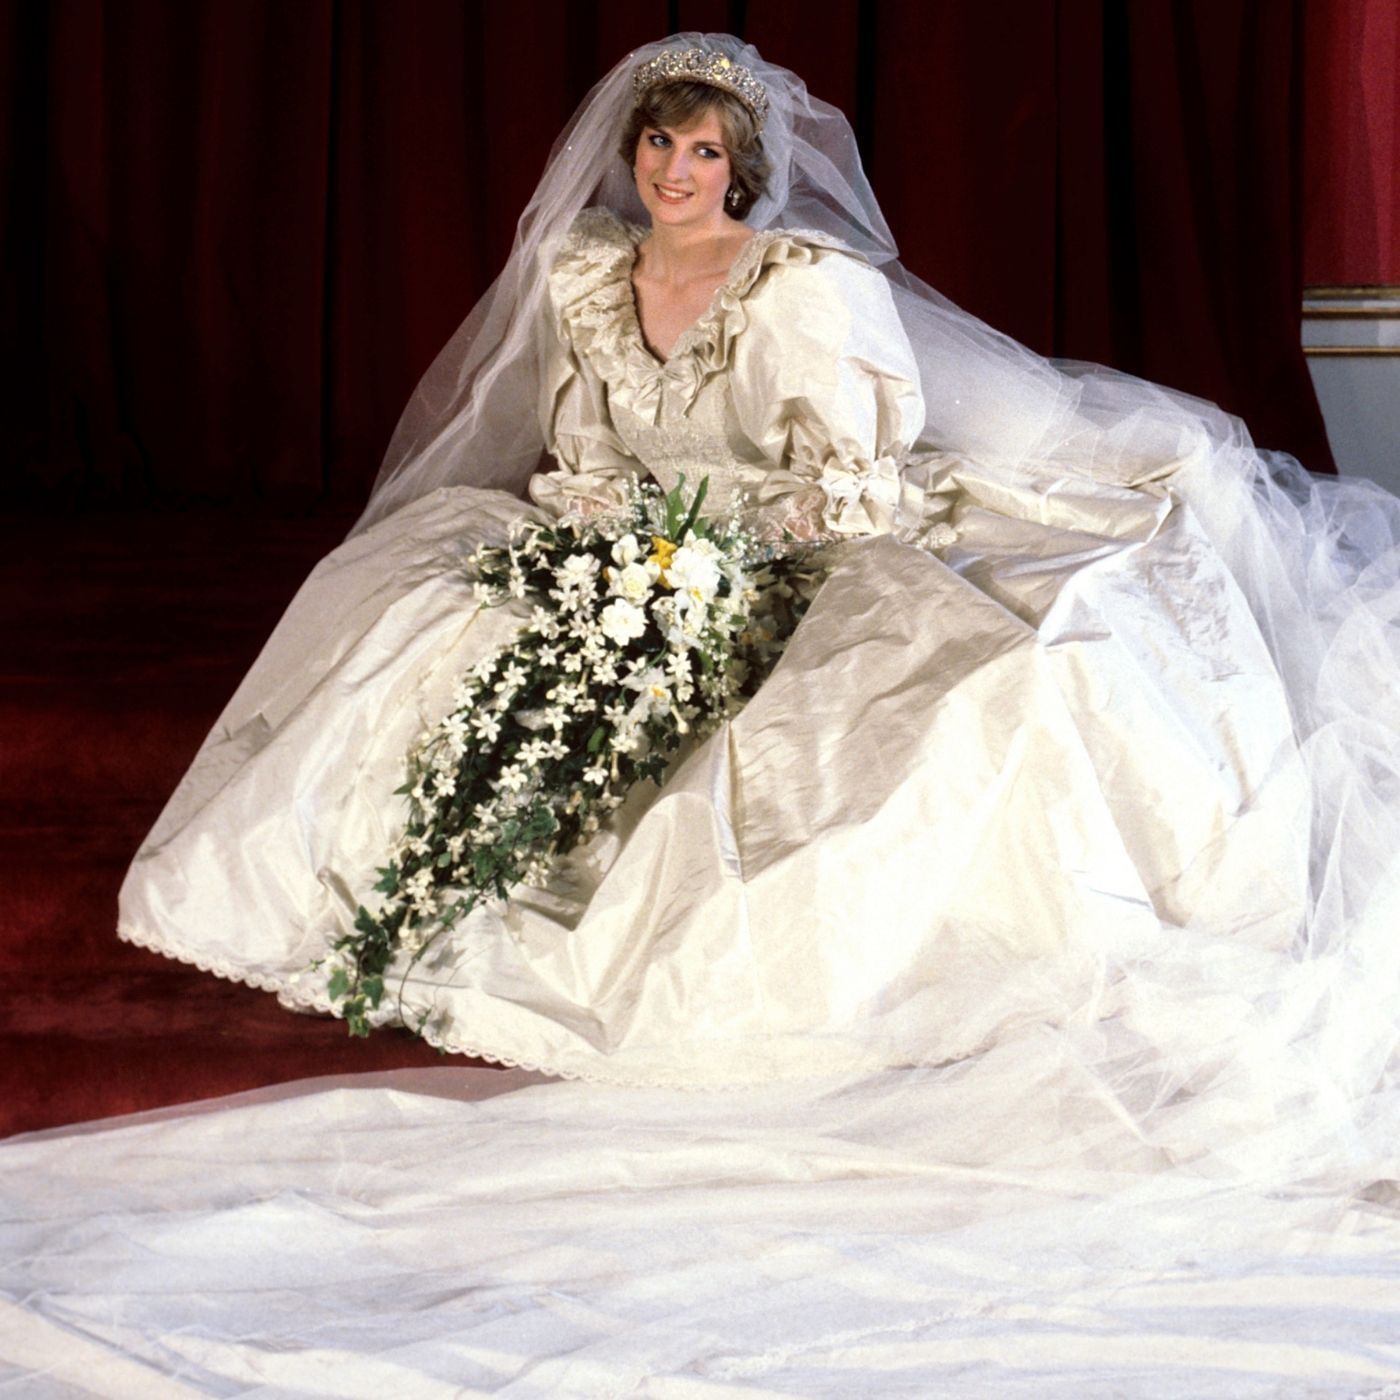 Up close with Princess Diana’s wedding dress – Pod Save The Queen ...